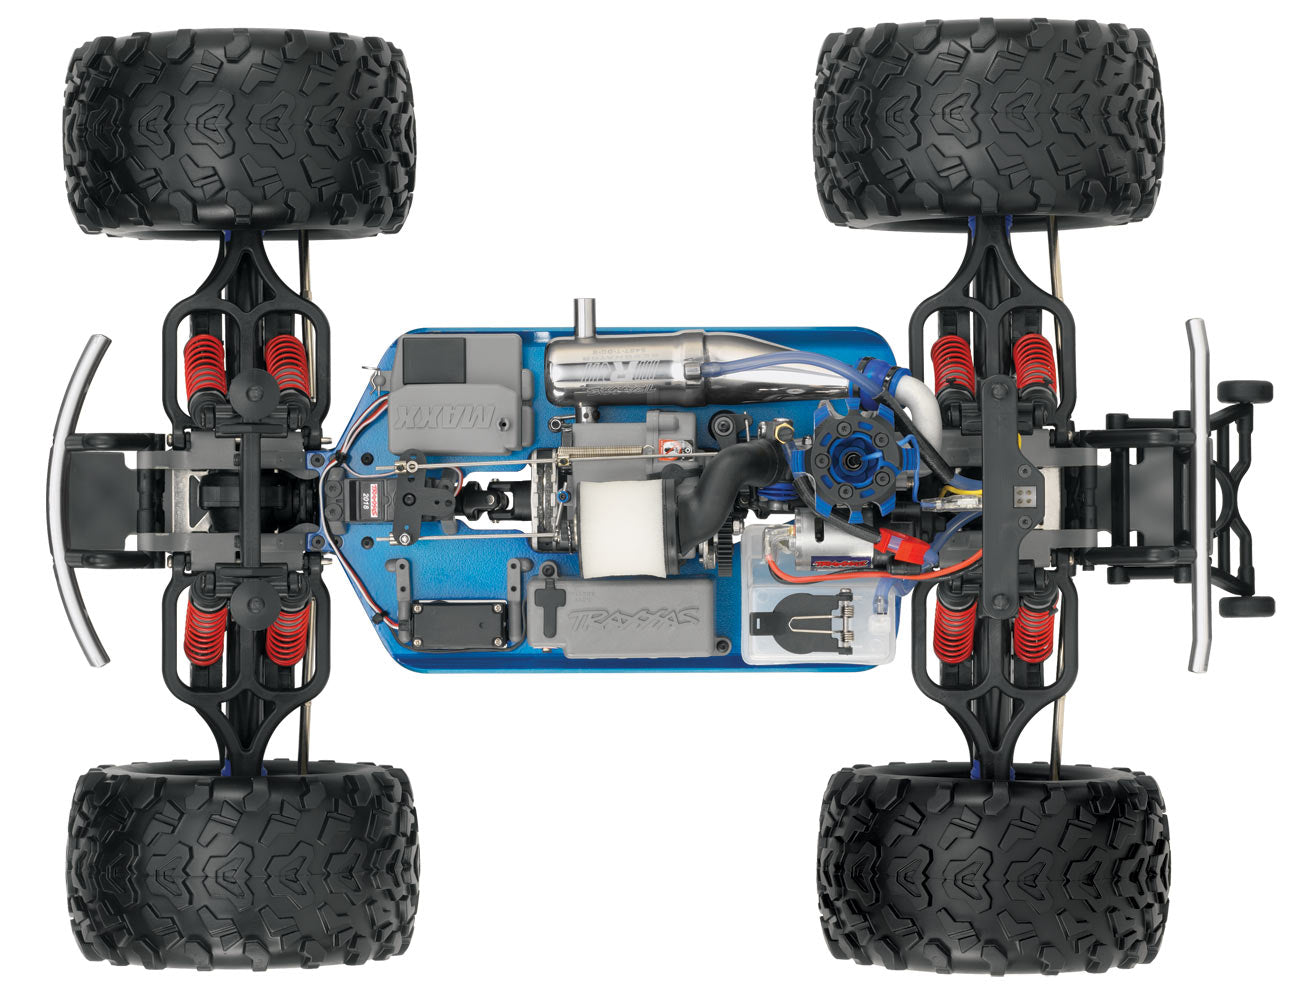 White T-Maxx® 3.3: 1/10 Scale Nitro-PoweRed 4WD Maxx® Monster Truck with TQi™ 2.4GHz Radio System, Traxxas Link™ Wireless Module, and Traxxas Stability Management (TSM)®